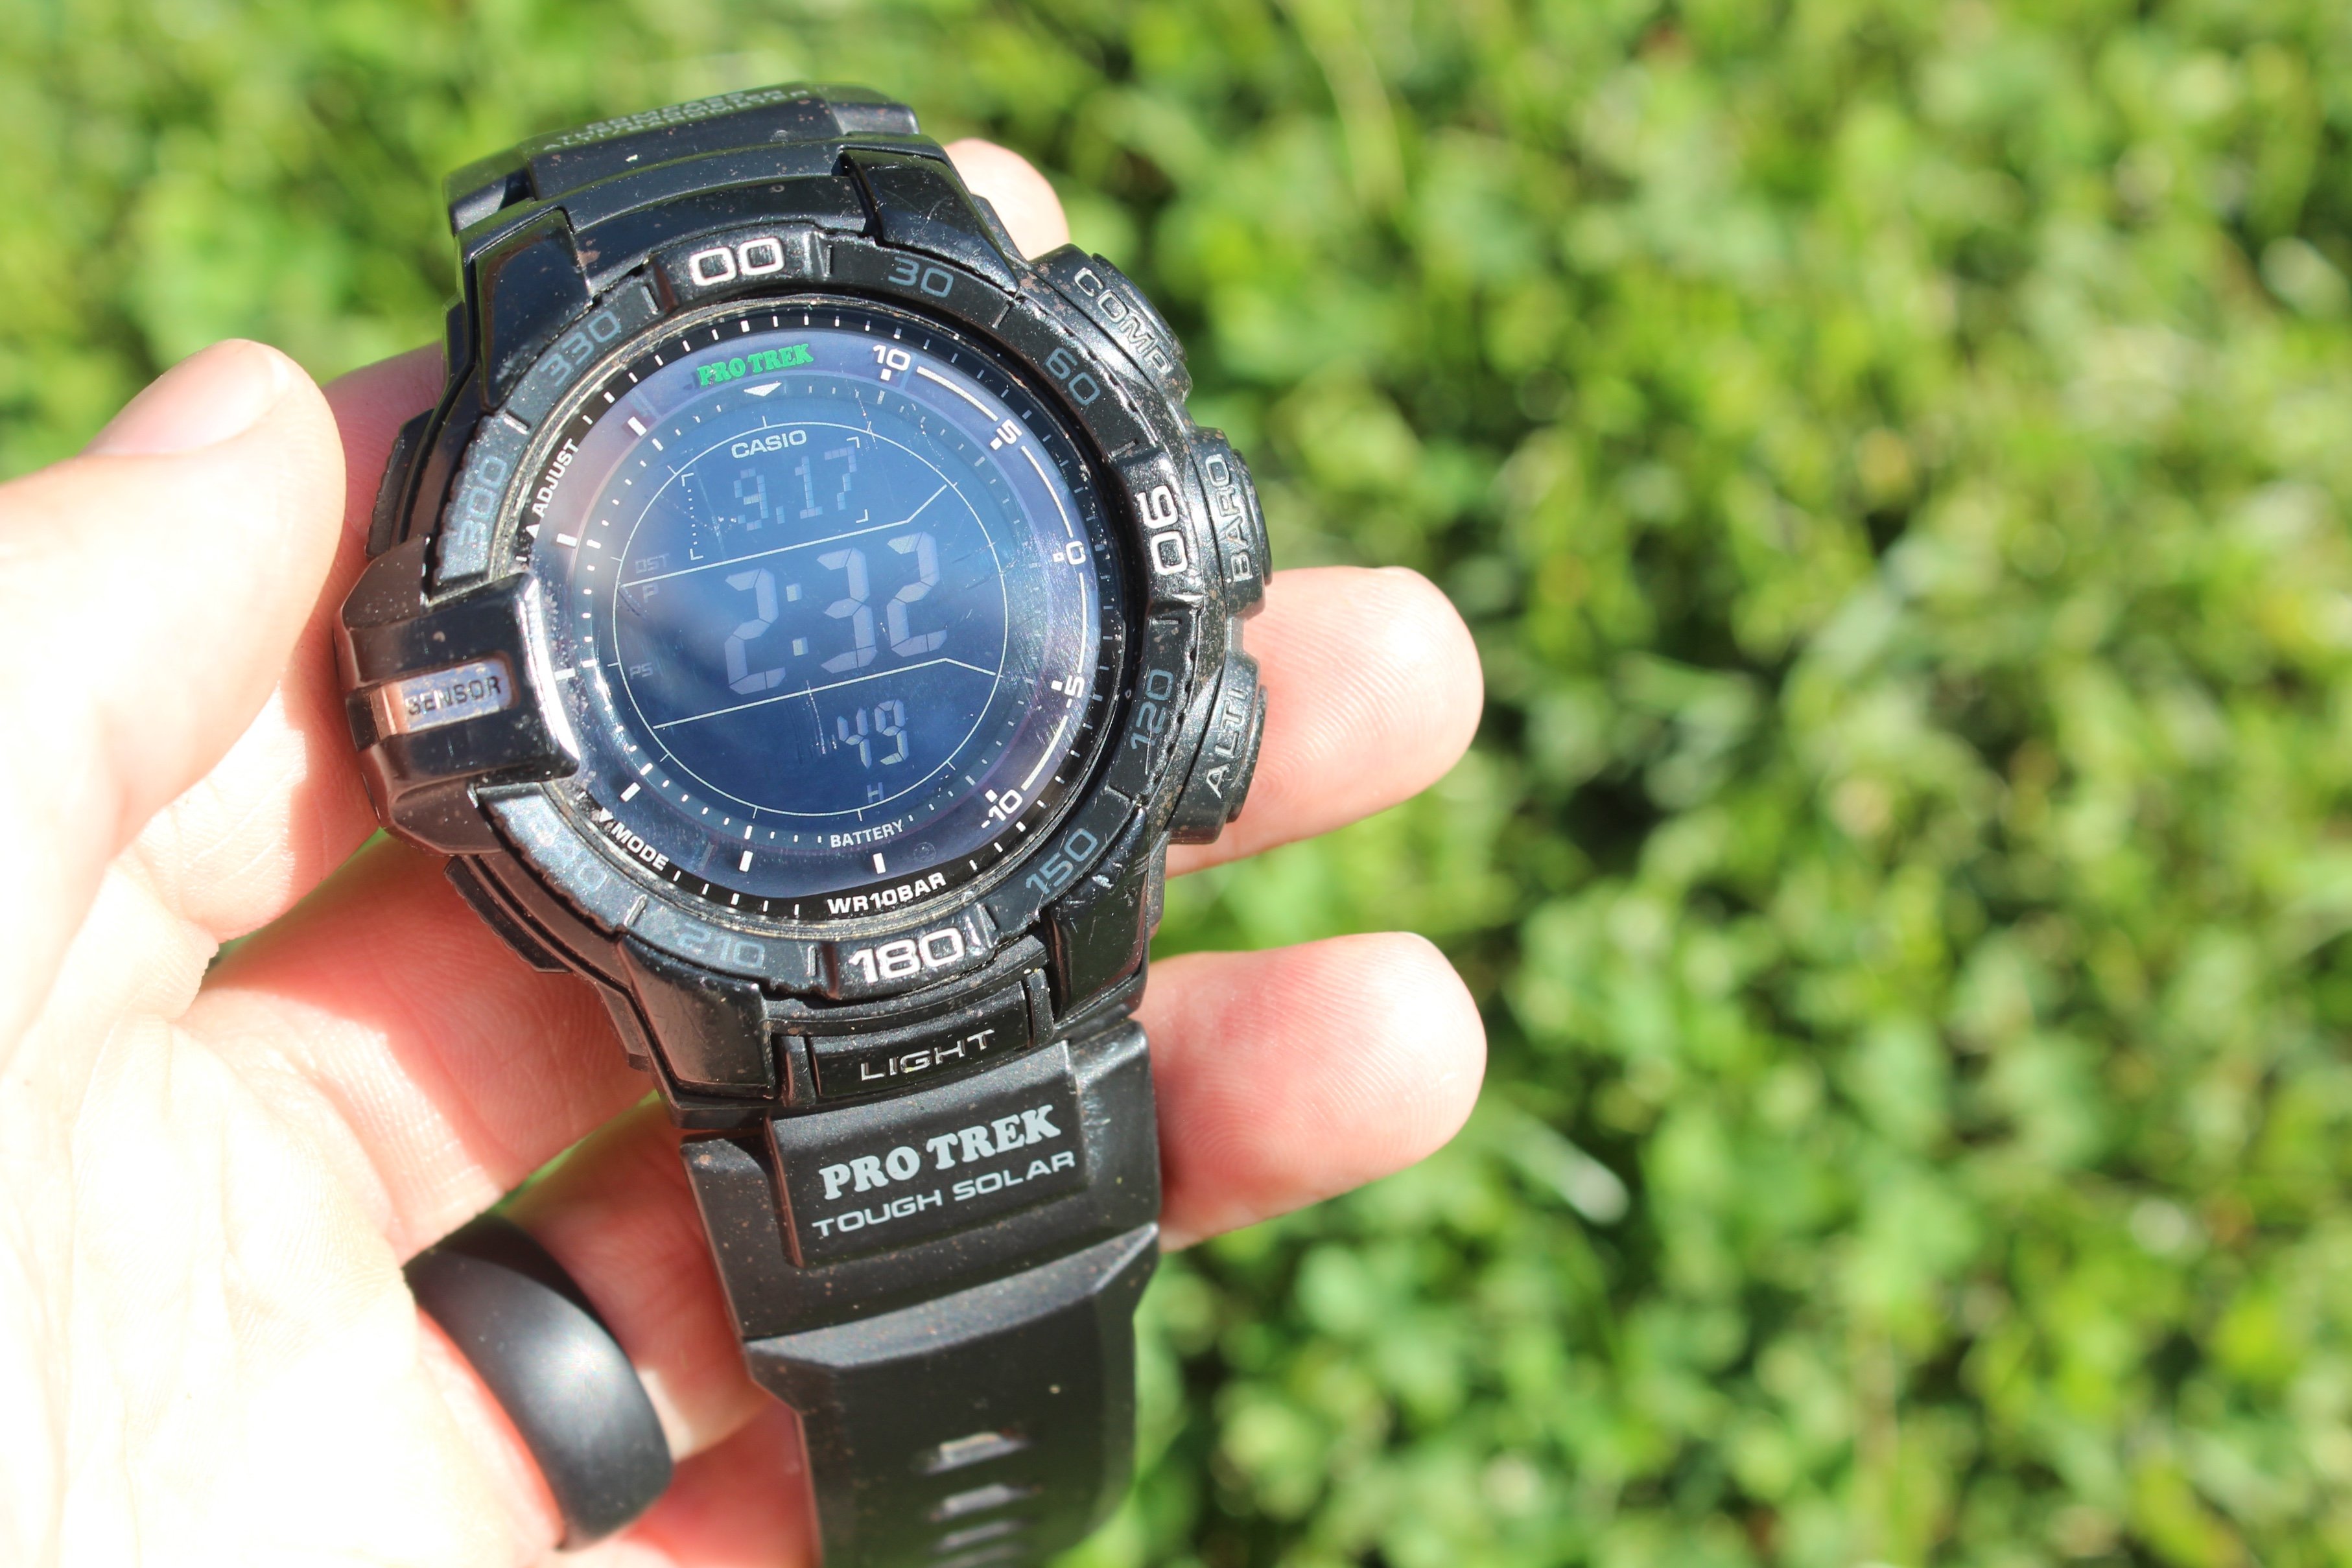 on Twitter: had my #ProTrek PRG-270-1A for over years now!!! It's still going strong! Read my review of this great watch here ⬇️⬇️⬇️ https://t.co/EwCvJNclb9 https://t.co/4fDY32h5Gv" / Twitter